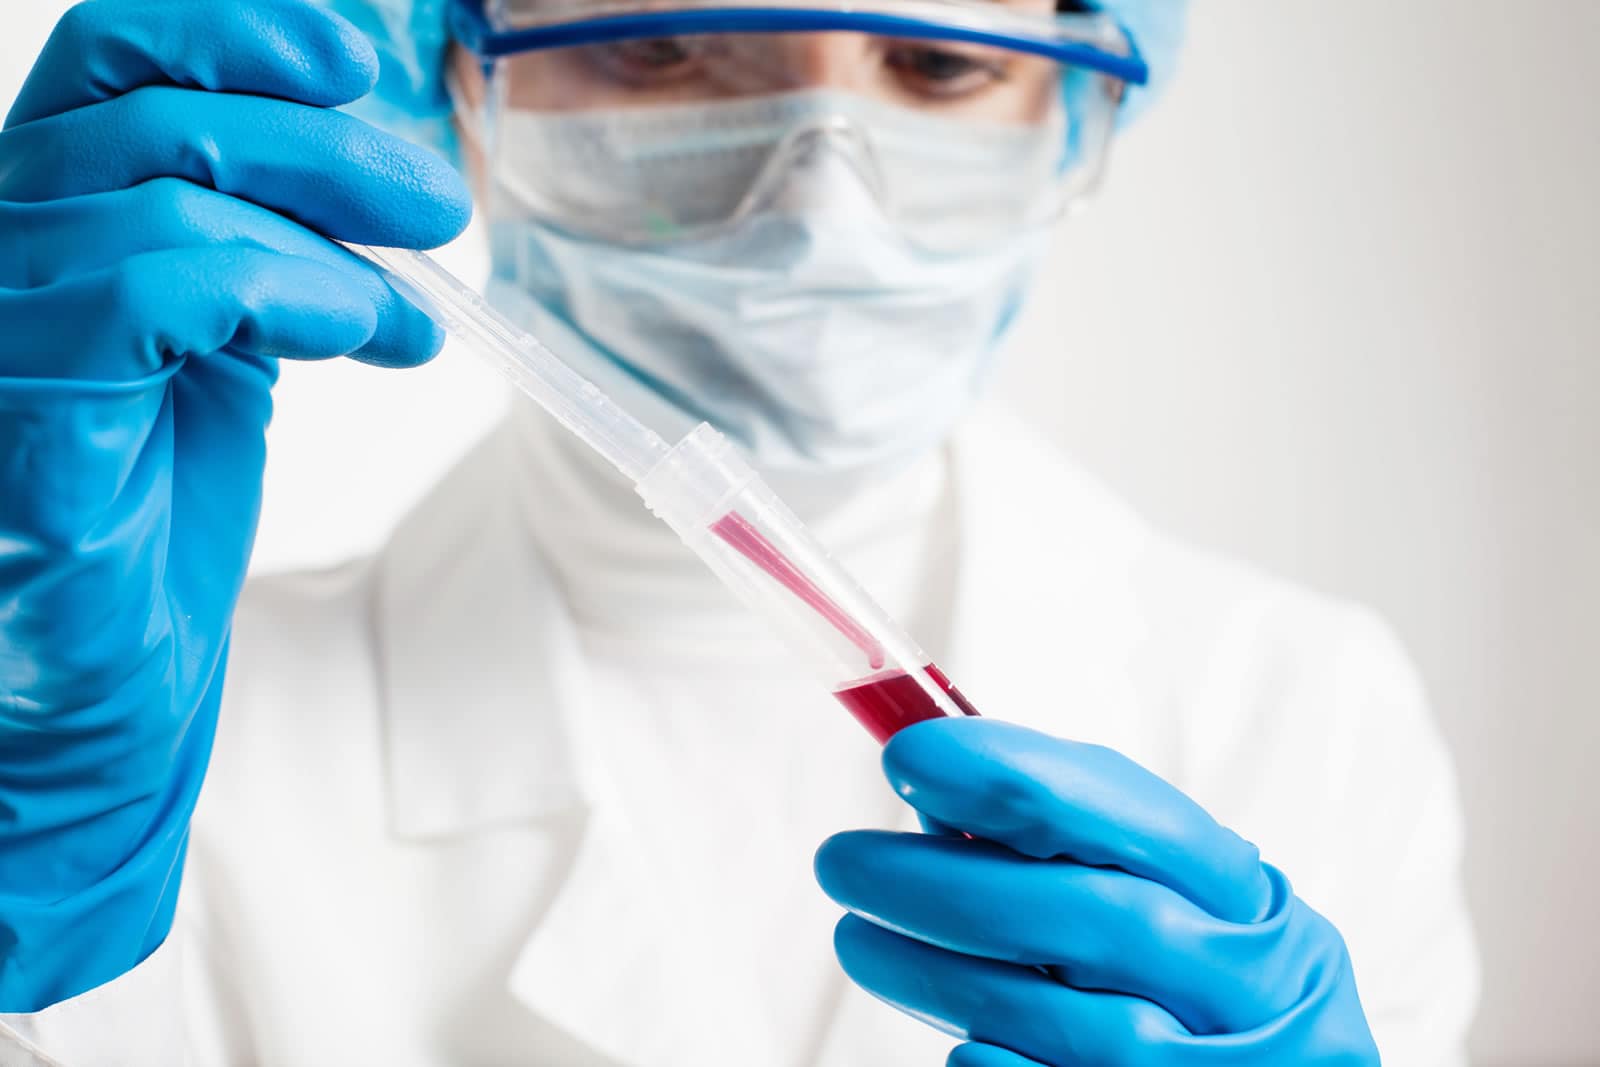 Female lab technician handling blood sample while wearing personal protection equipment